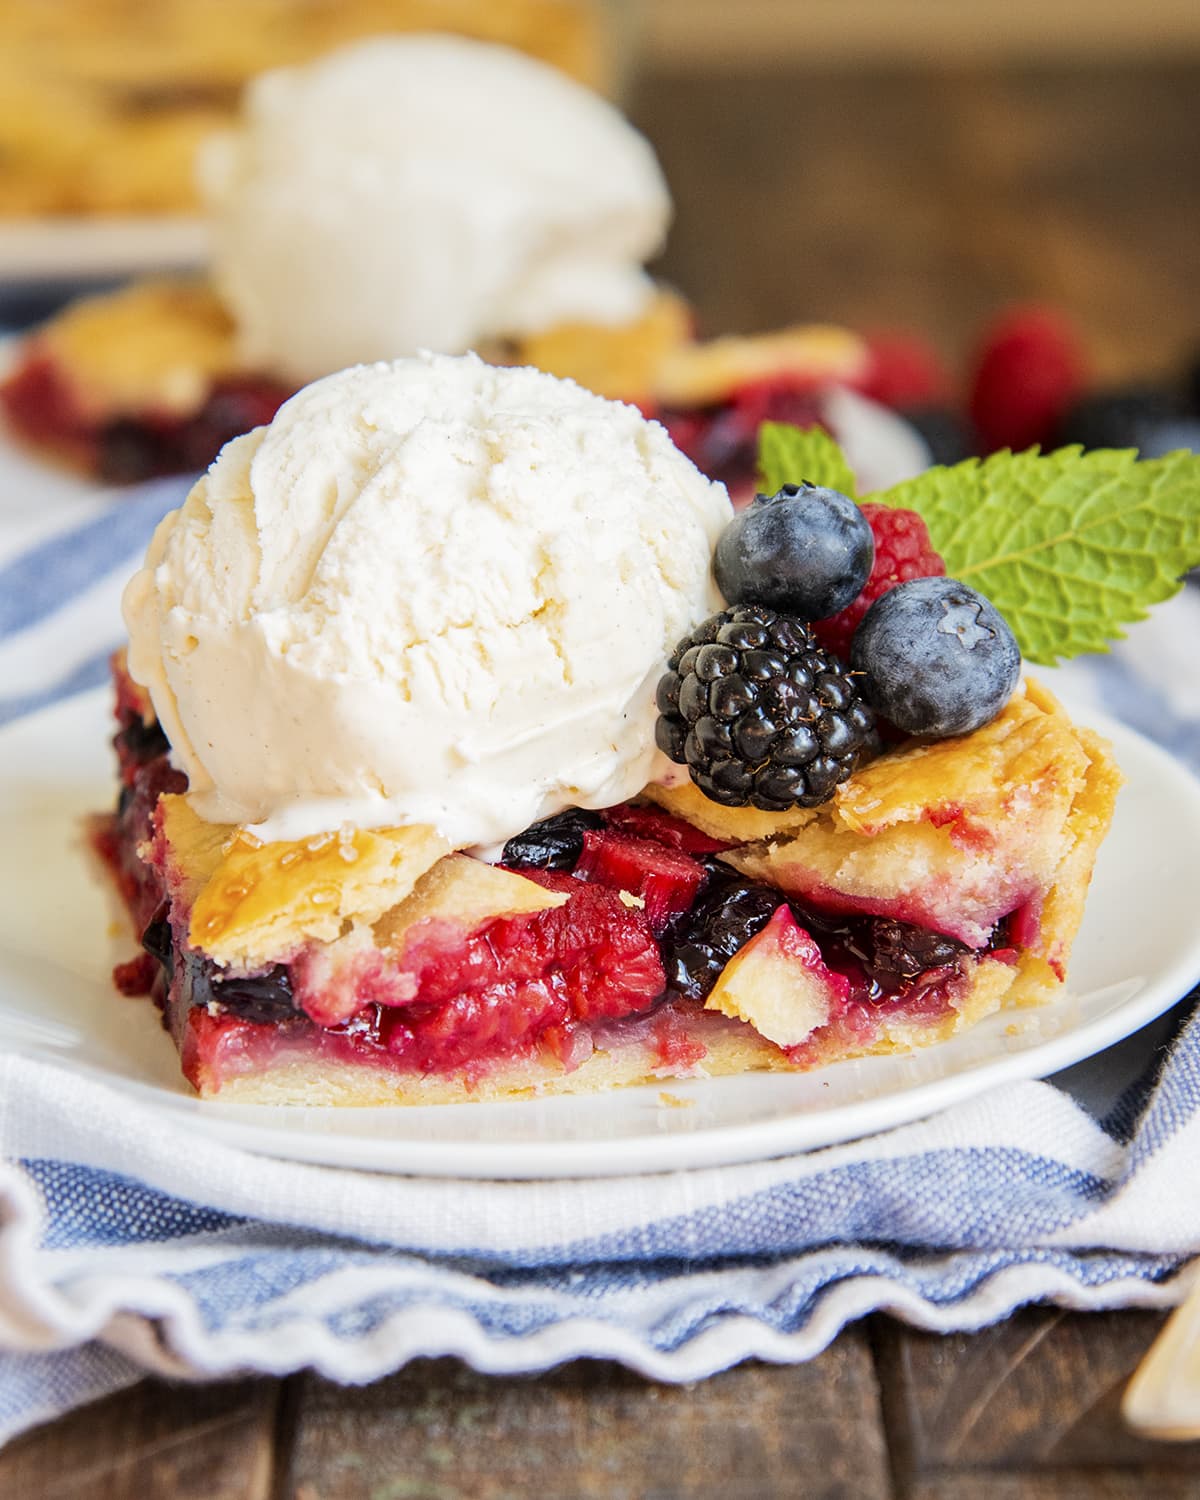 A slice of slab pie on a plate topped with ice cream and fresh berries.